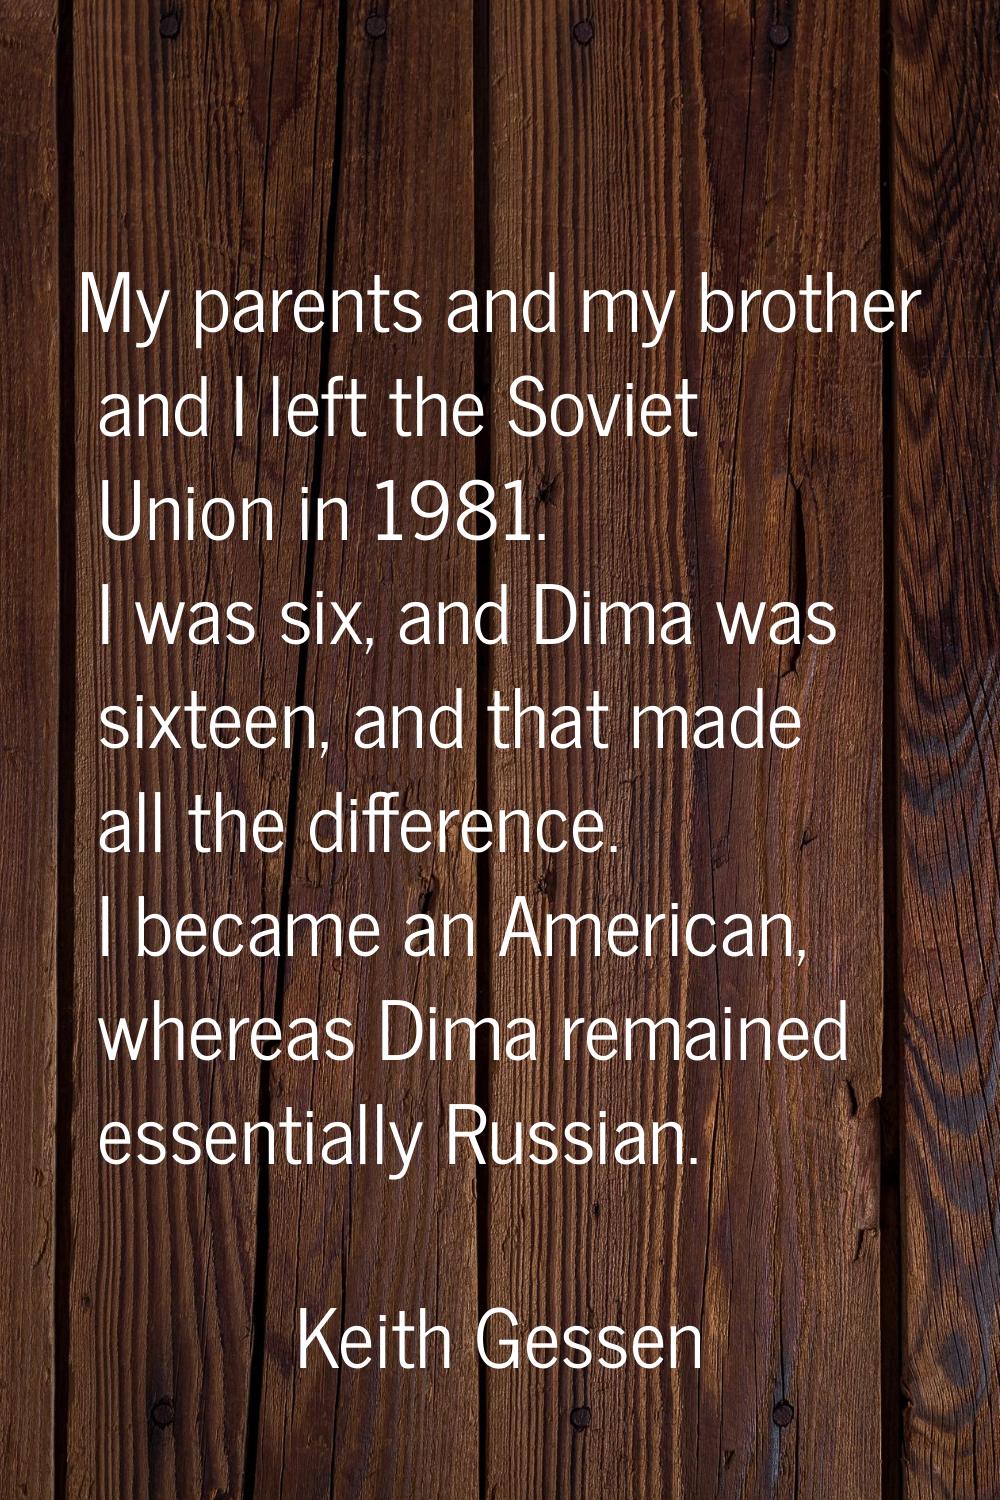 My parents and my brother and I left the Soviet Union in 1981. I was six, and Dima was sixteen, and